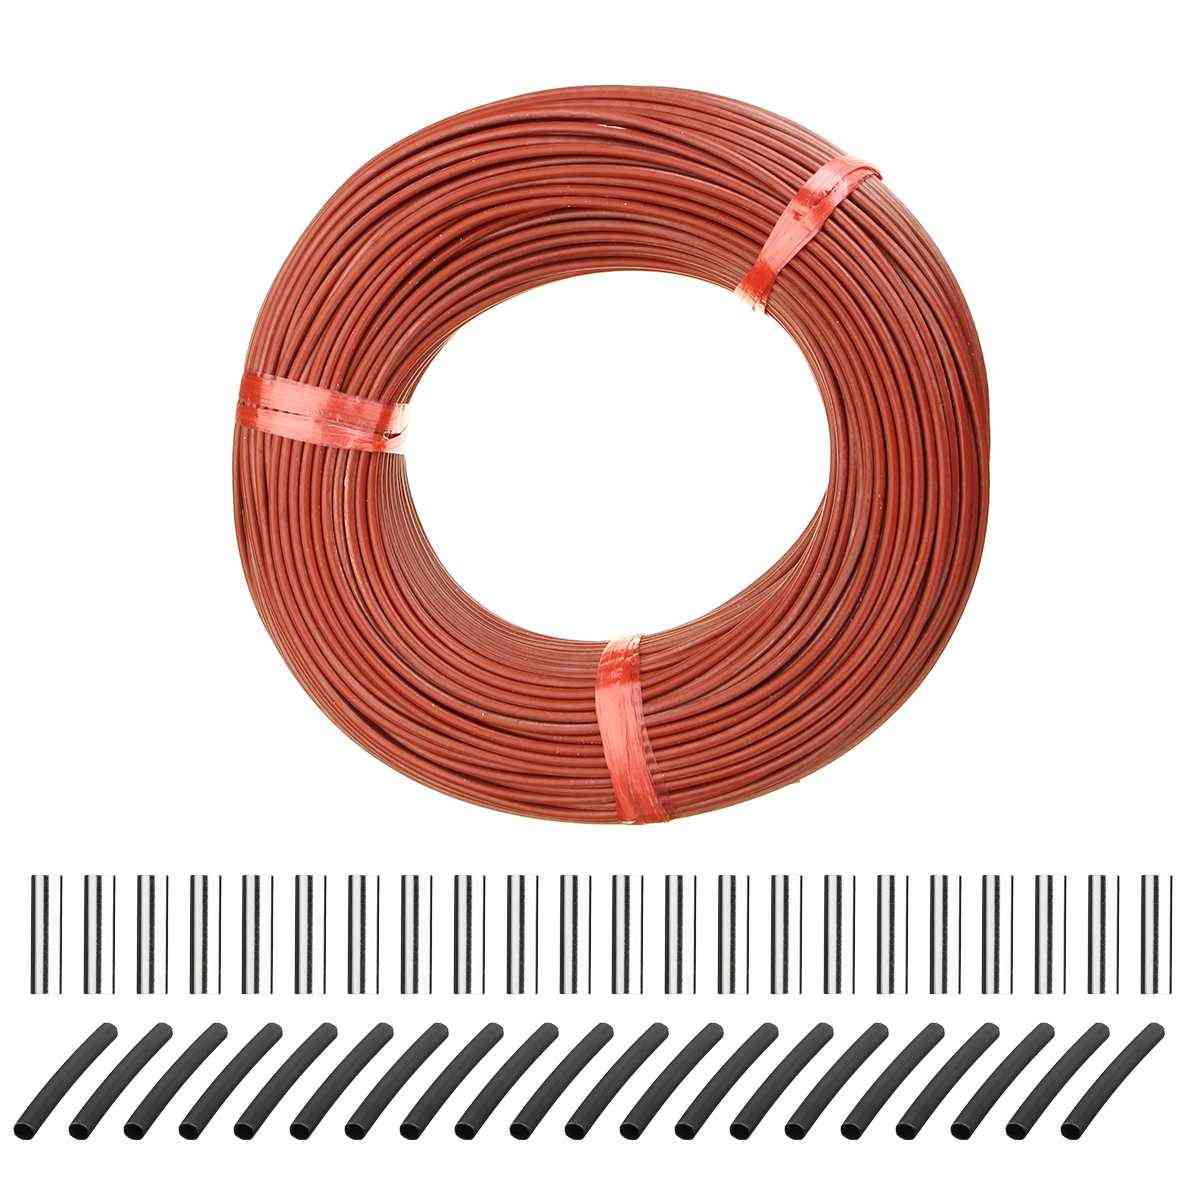 100m Carbon Fiber Infrared Floor Heating Cable